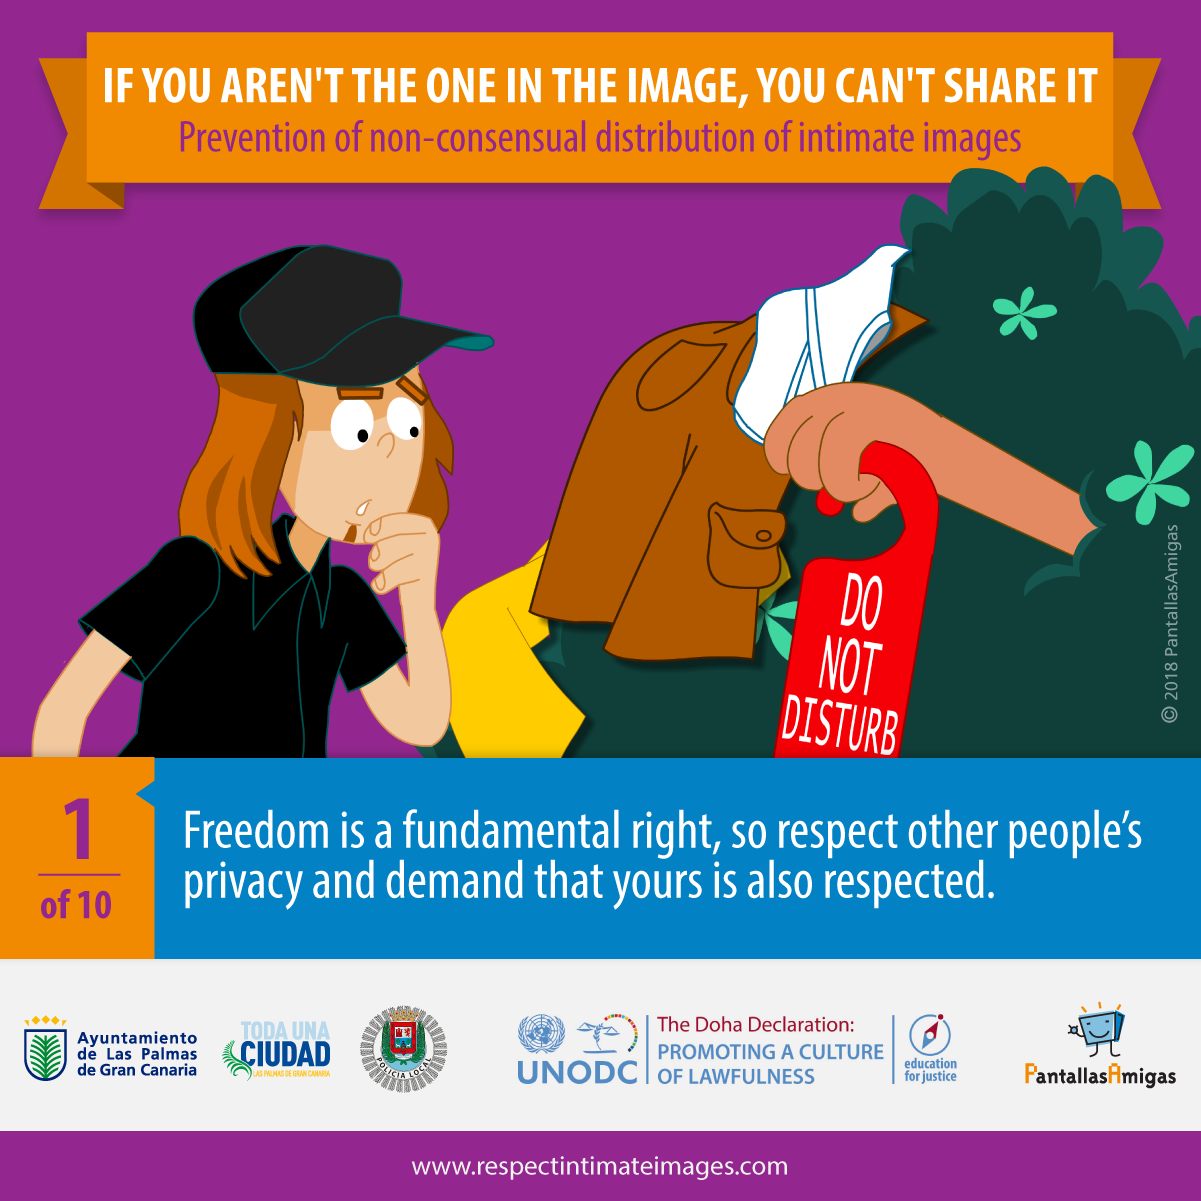 Freedom is a fundamental right, so respect other people’s privacy and demand that yours is also respected.